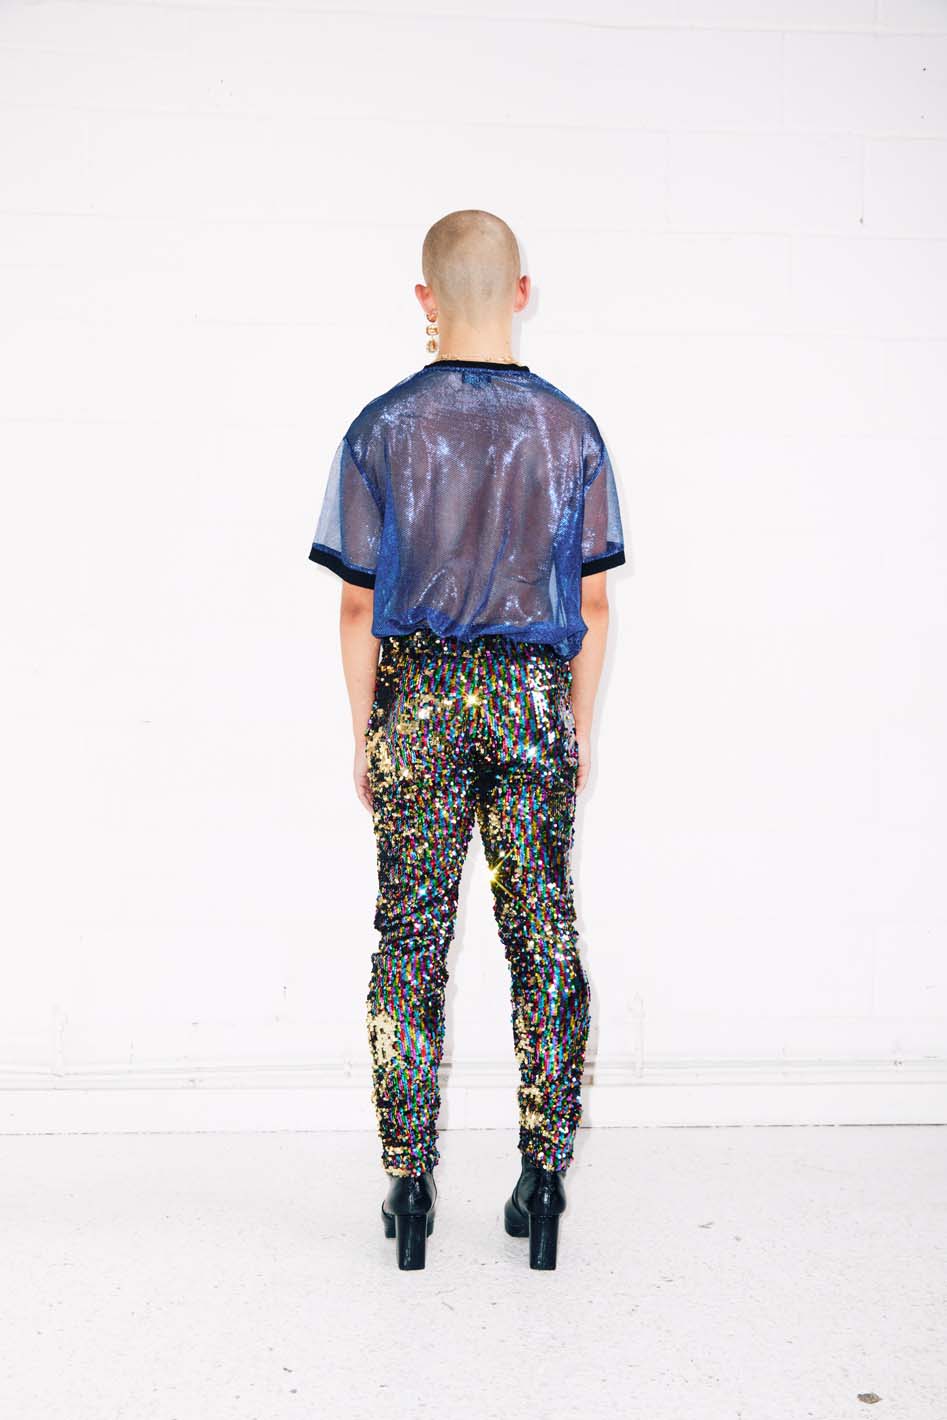 man wearing rainbow sequin pants and sheer blue top for rave outfit